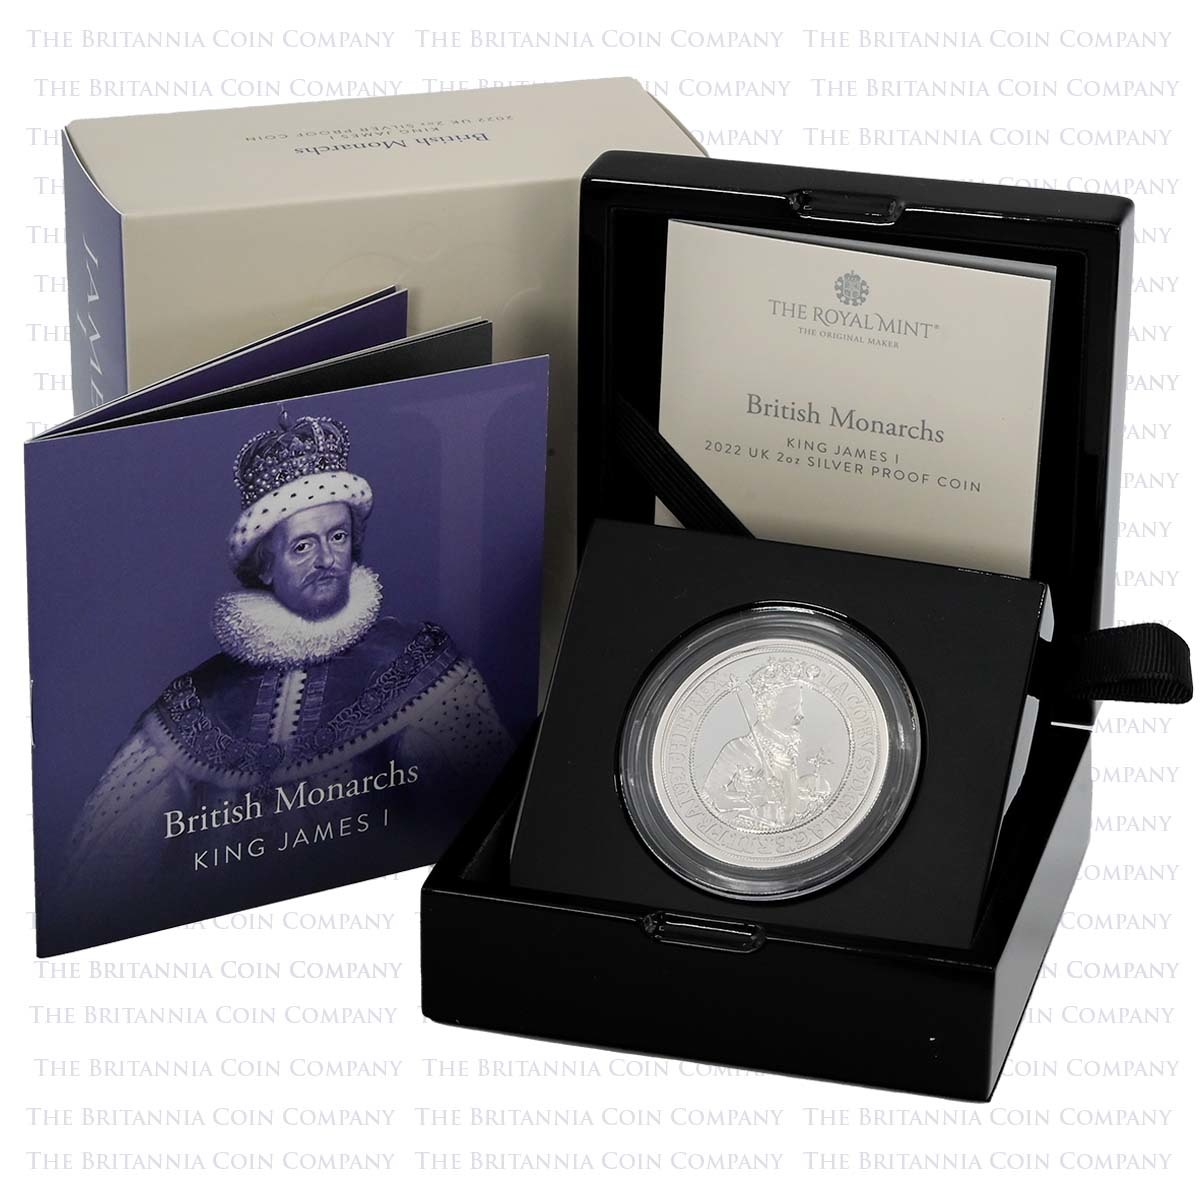 UK22J1S2O 2022 British Monarchs James I 2 Ounce Silver Proof Boxed